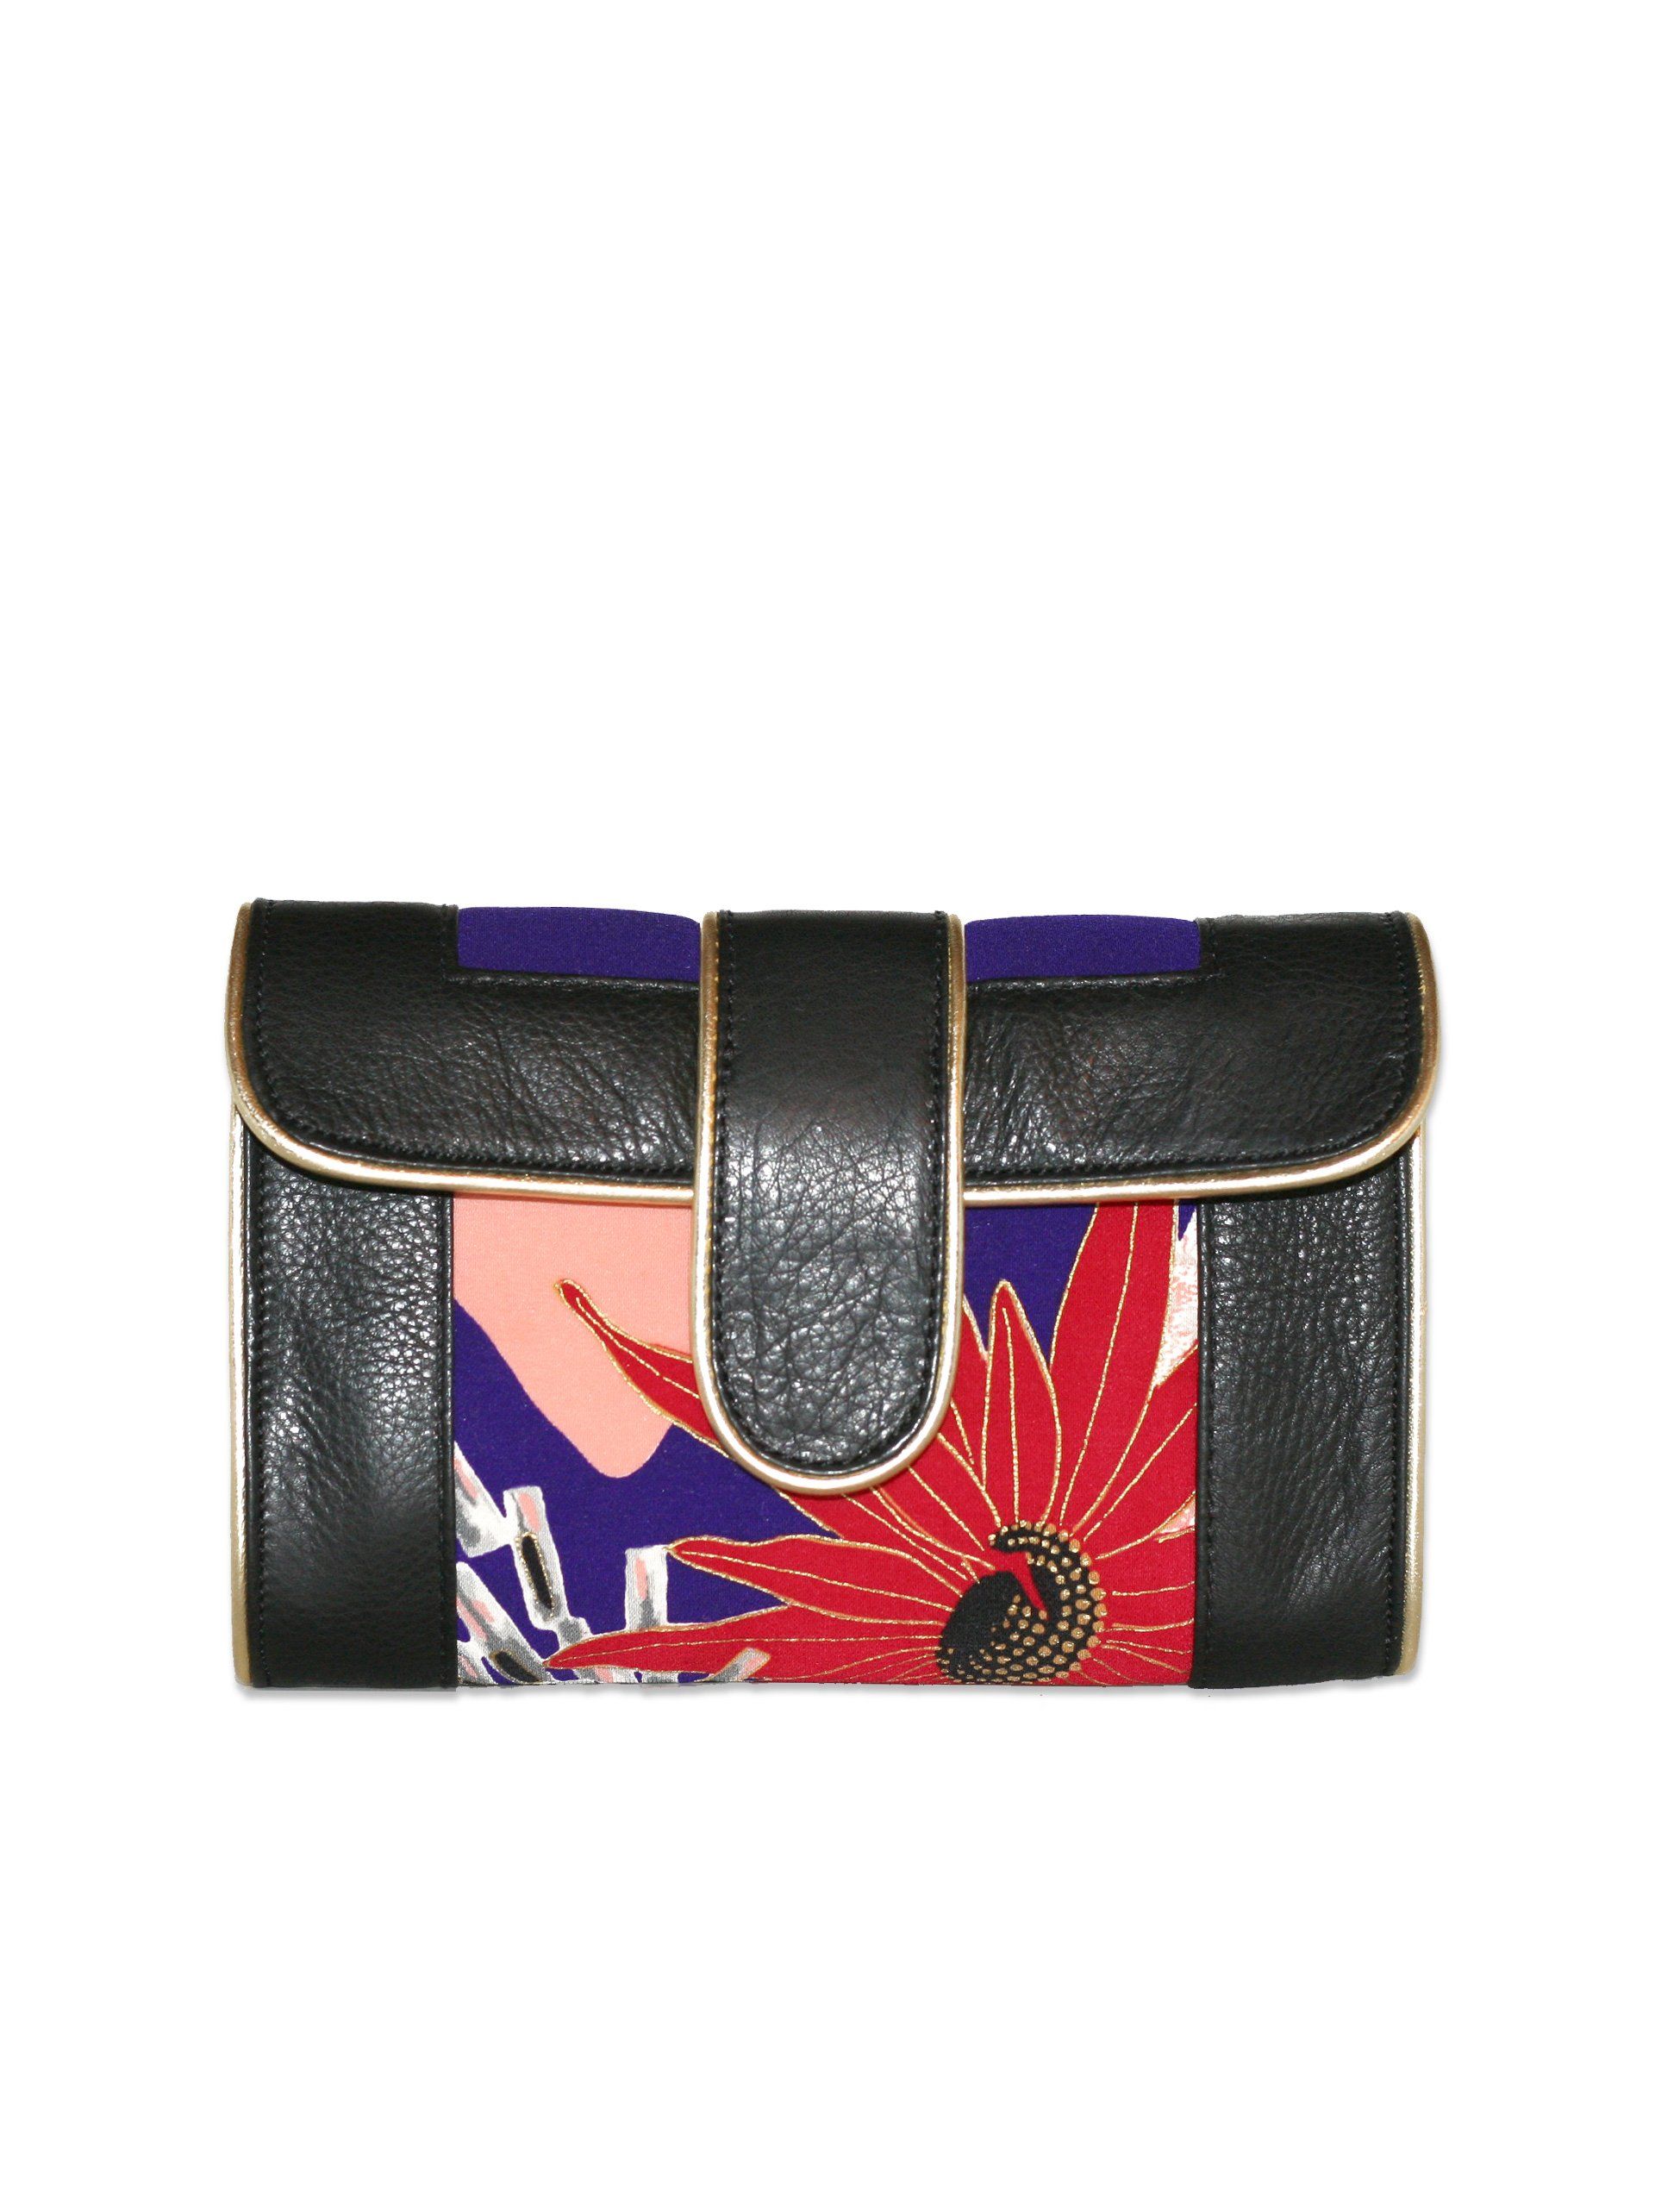 Versatile mini crossbody that easily transforms from day to night. The main fabric features a unique print that was cut from an authentic, vintage kimono of abstract flowers. Handmade mini crossbody is a one-of-a-kind design. 